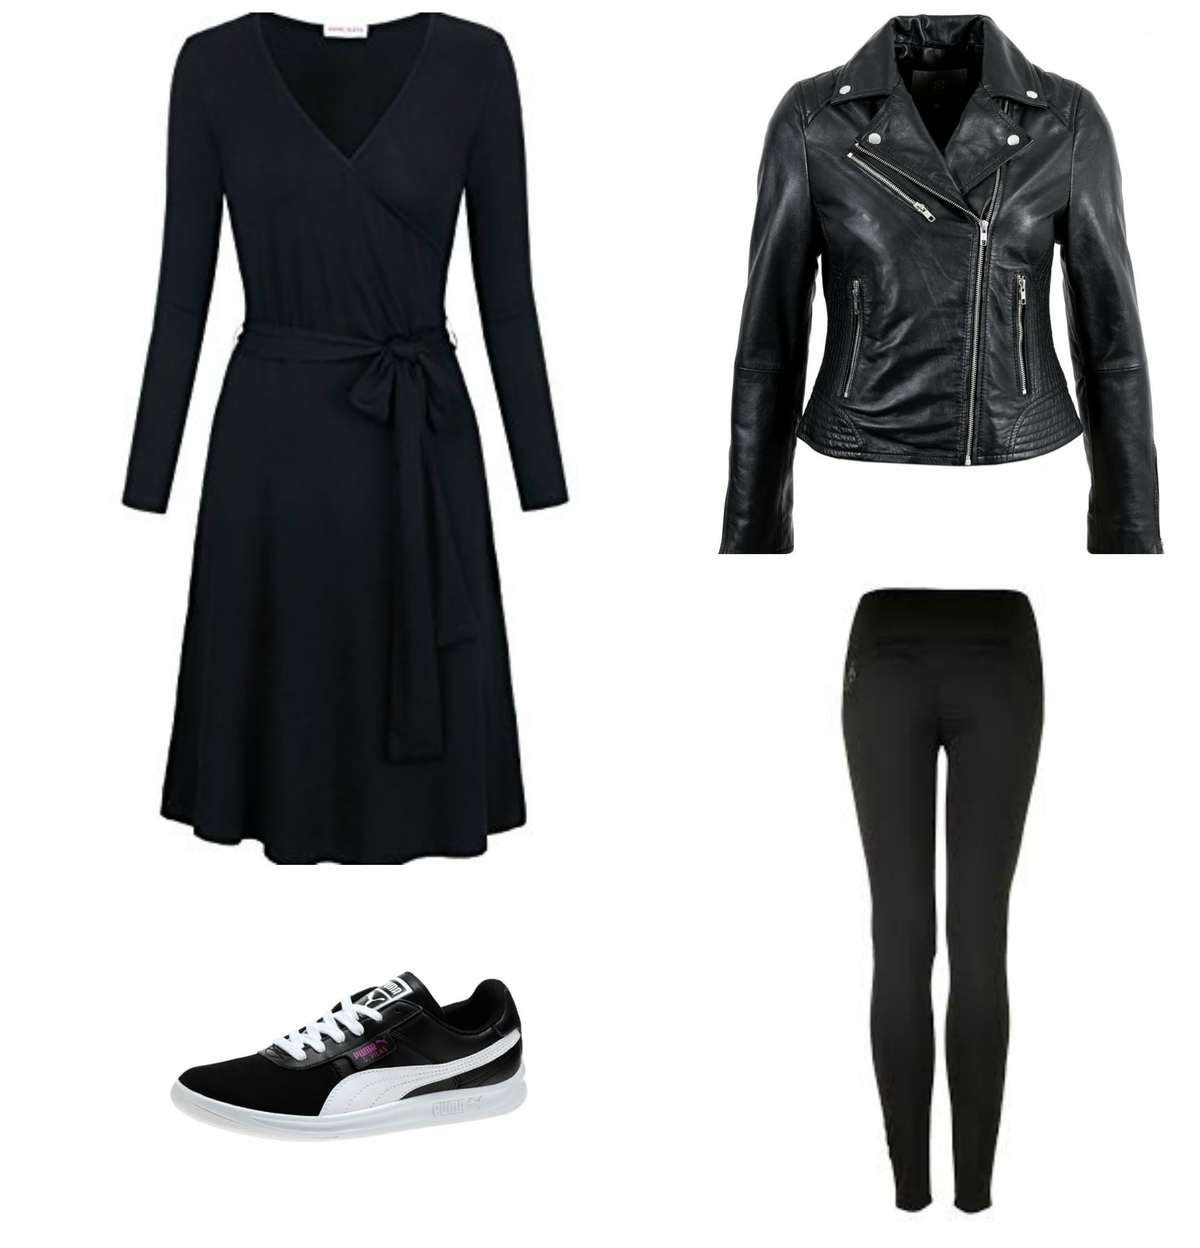 Pieces from the travel capsule wardrobe making an outfit: black matte jersey wrap dress with black leggings, a leather Moto jacket, and black Puma sneakers